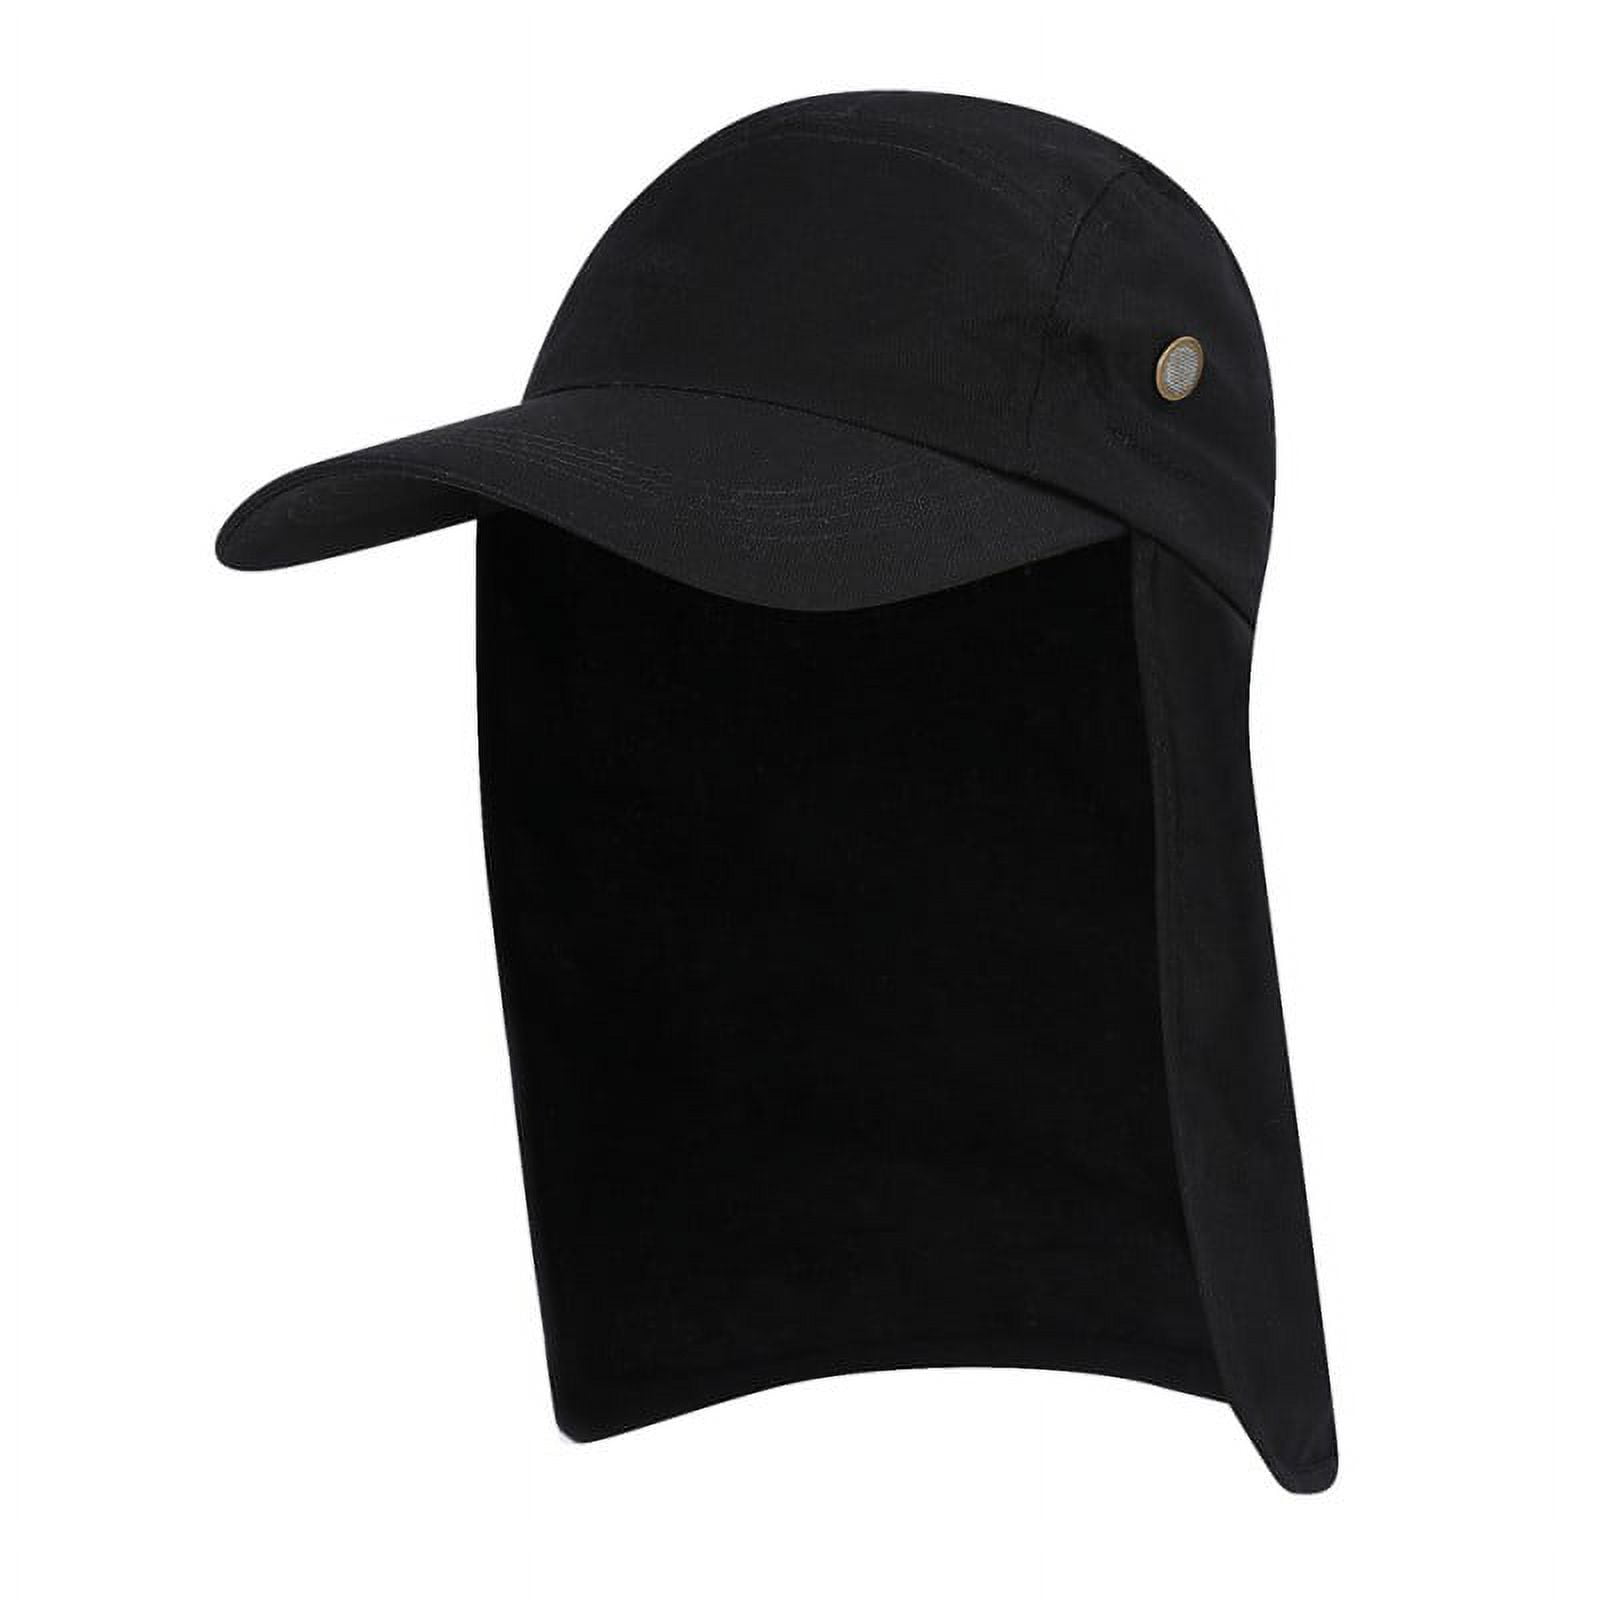 Fishing Cap with Ear and Neck Flap Cover Adjustable Breathable Waterproof  Sports Hat Outdoor Sun Protection for Women and Men